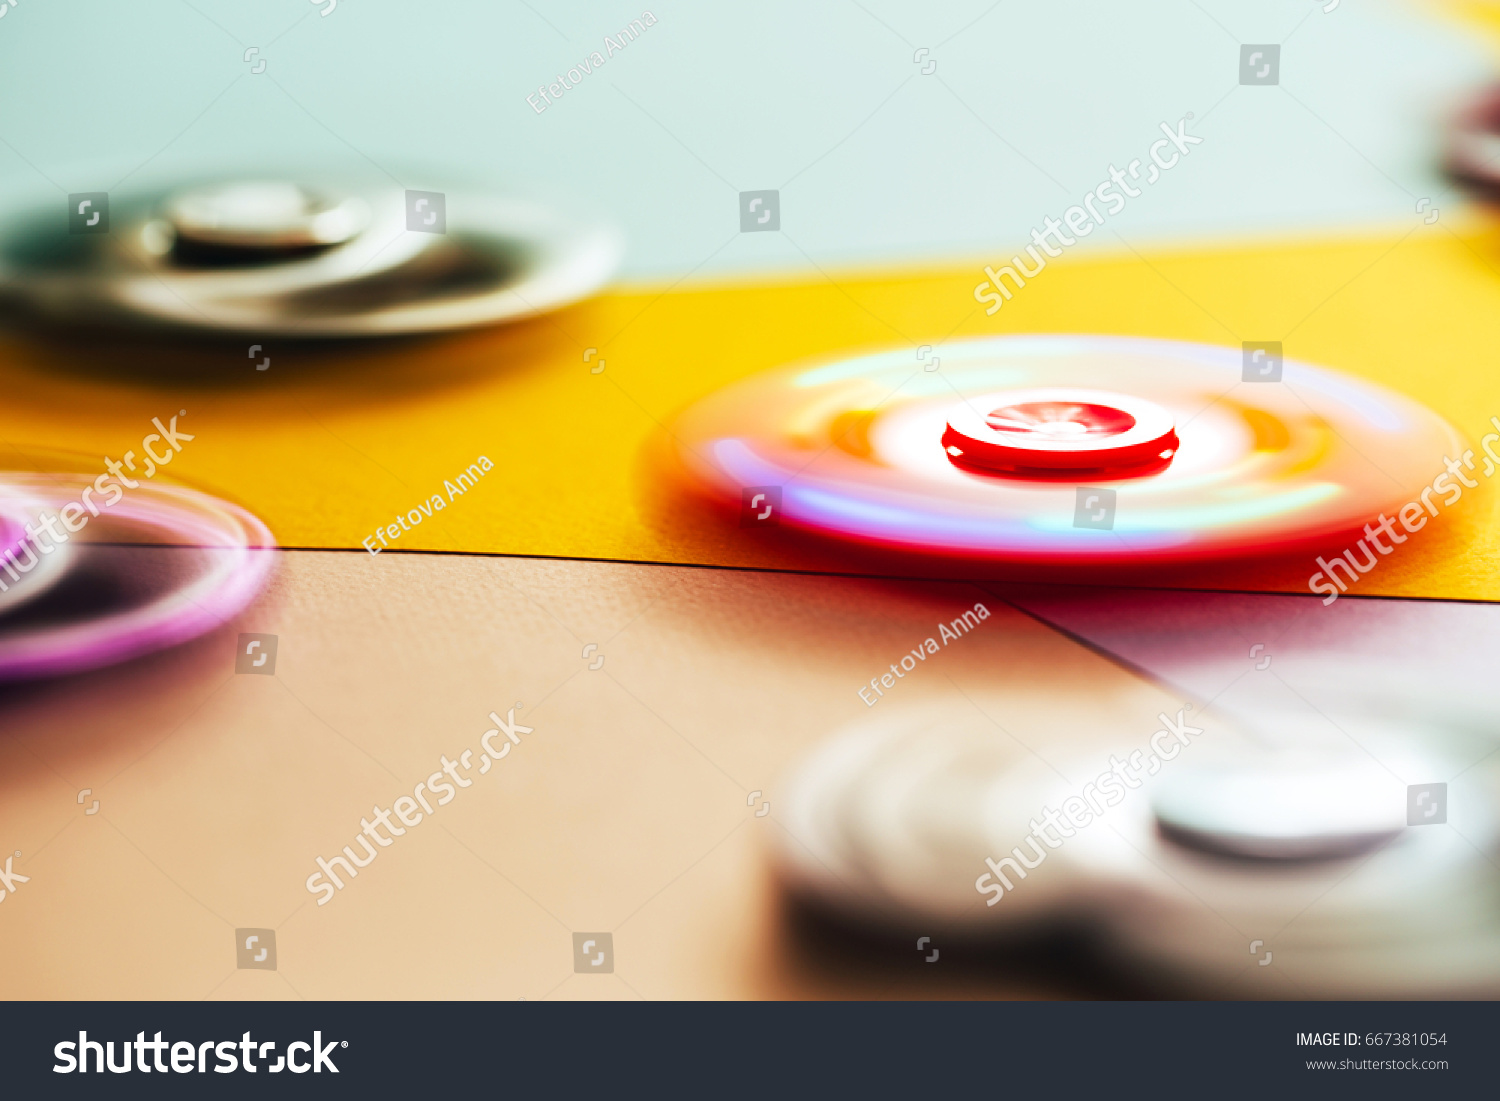 Silver fidget spinner rotating on multicolored background. #667381054